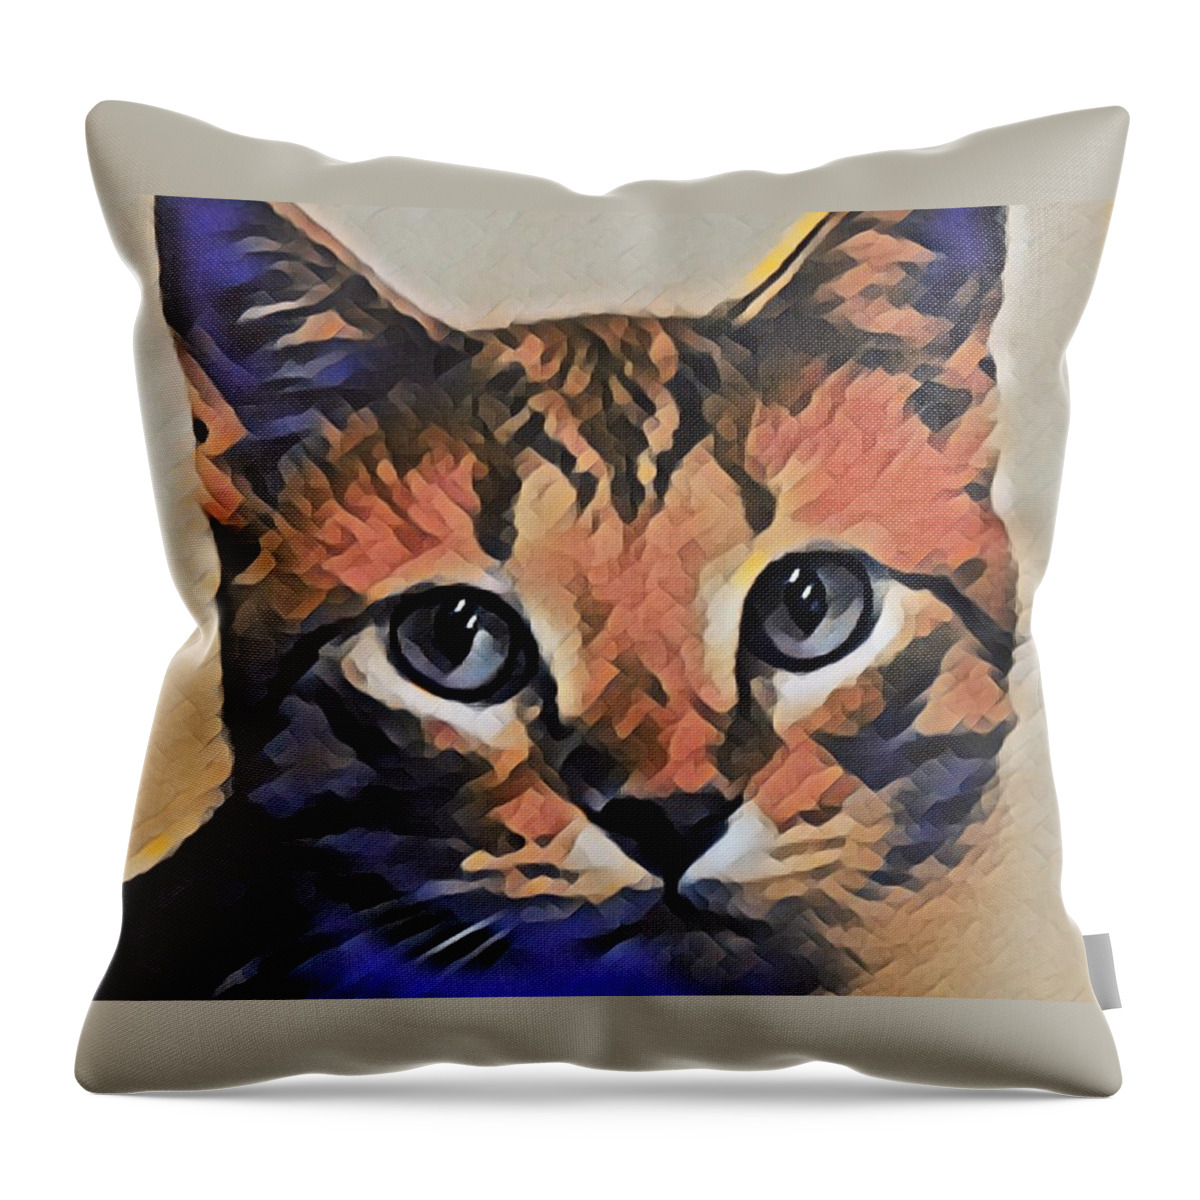 Cat Throw Pillow featuring the photograph Purrfect by Kimberly Woyak